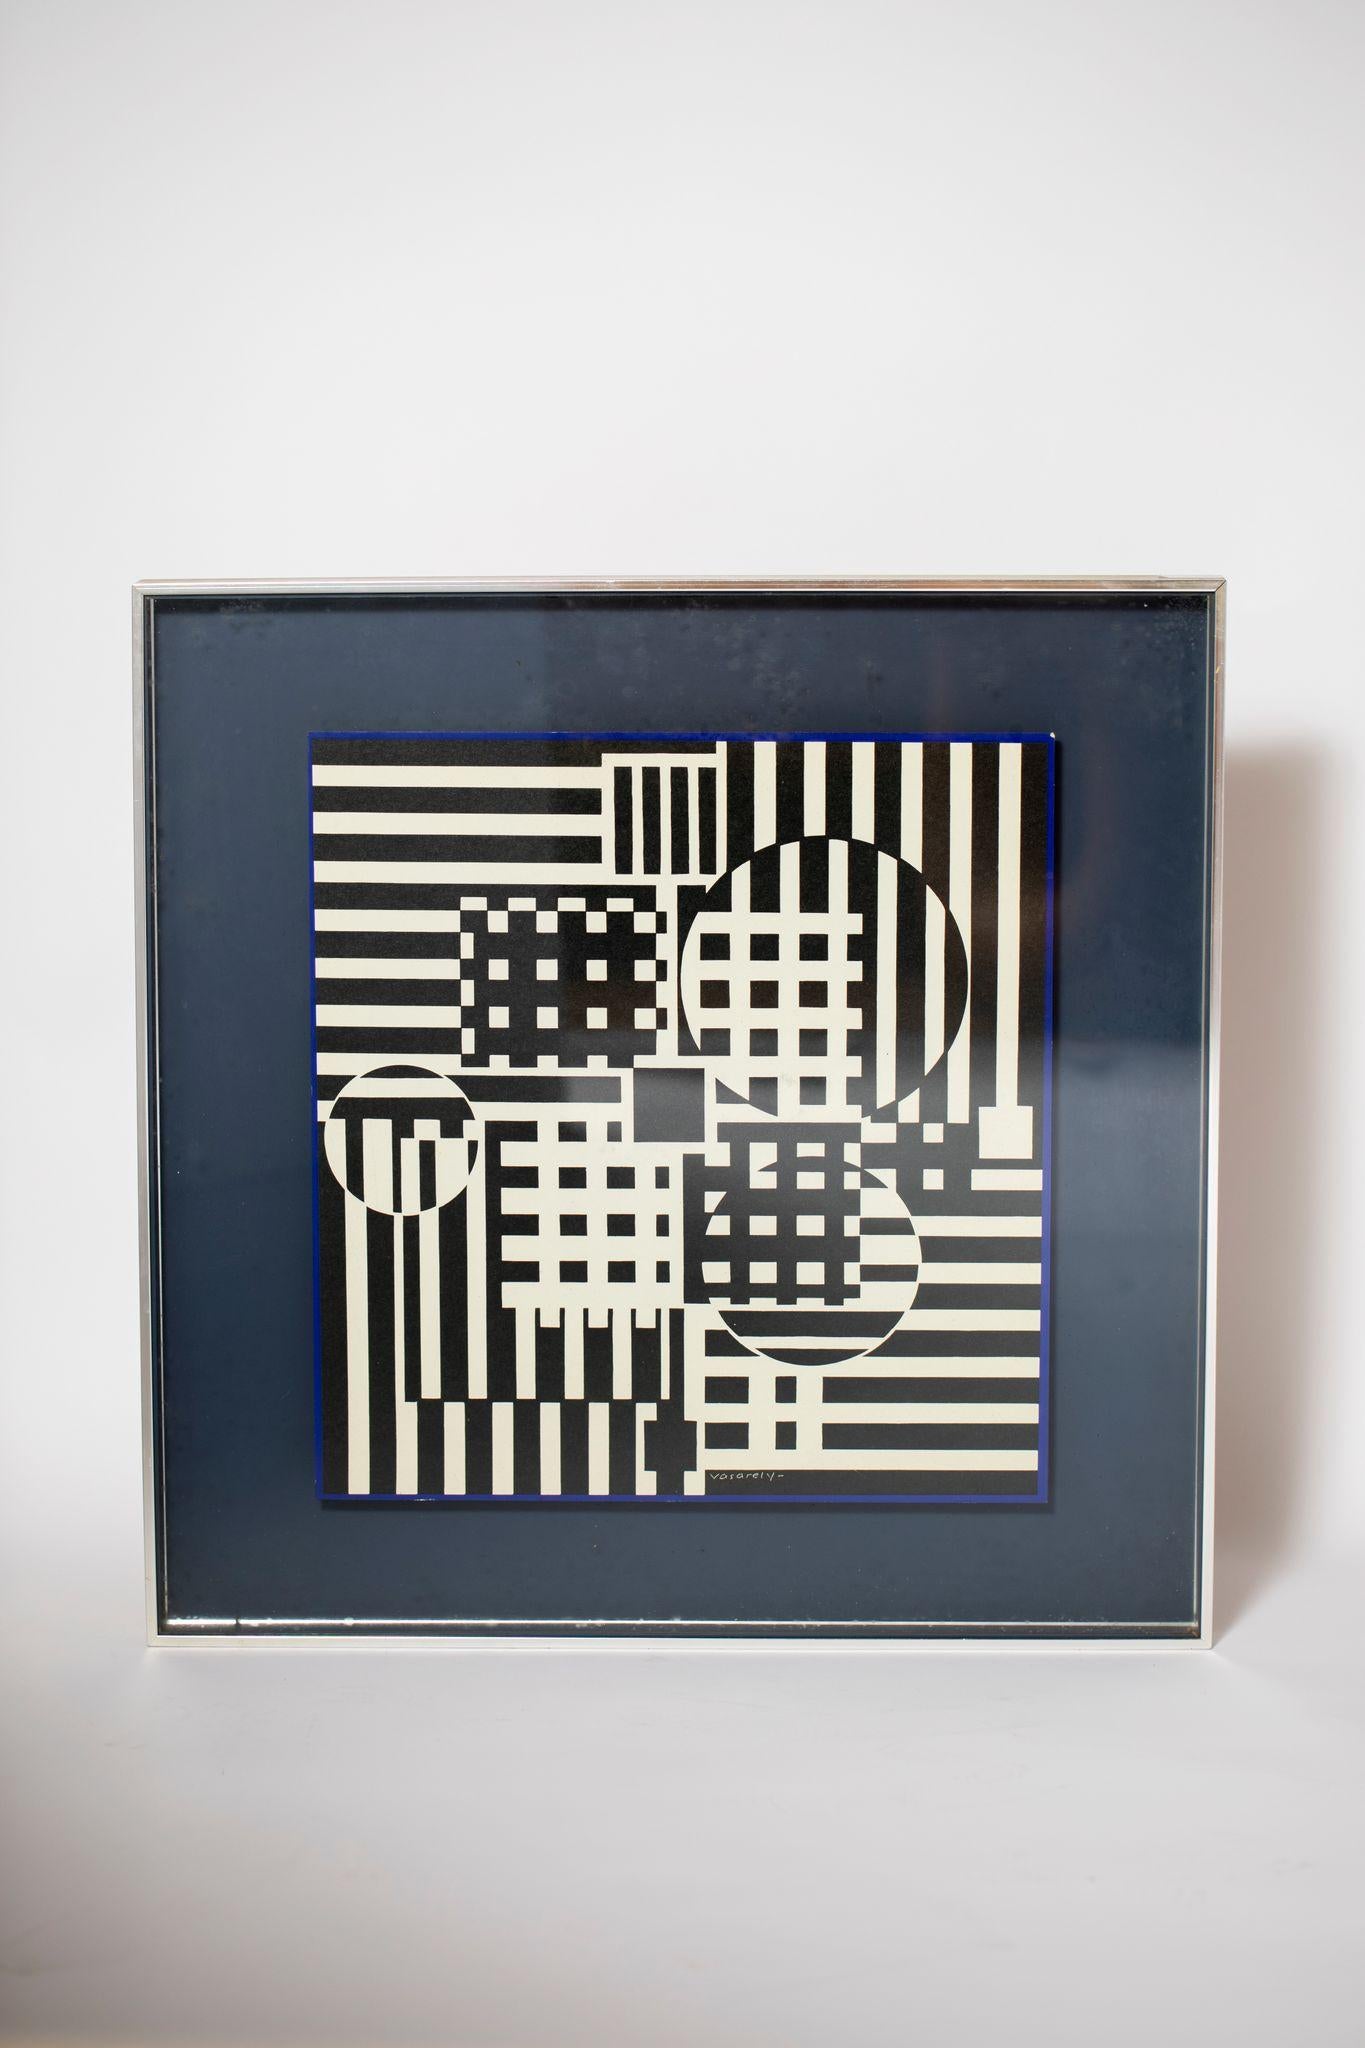 Box framed geometric print by Victor Vasarely, signed.

Original brushed stainless steel frame.